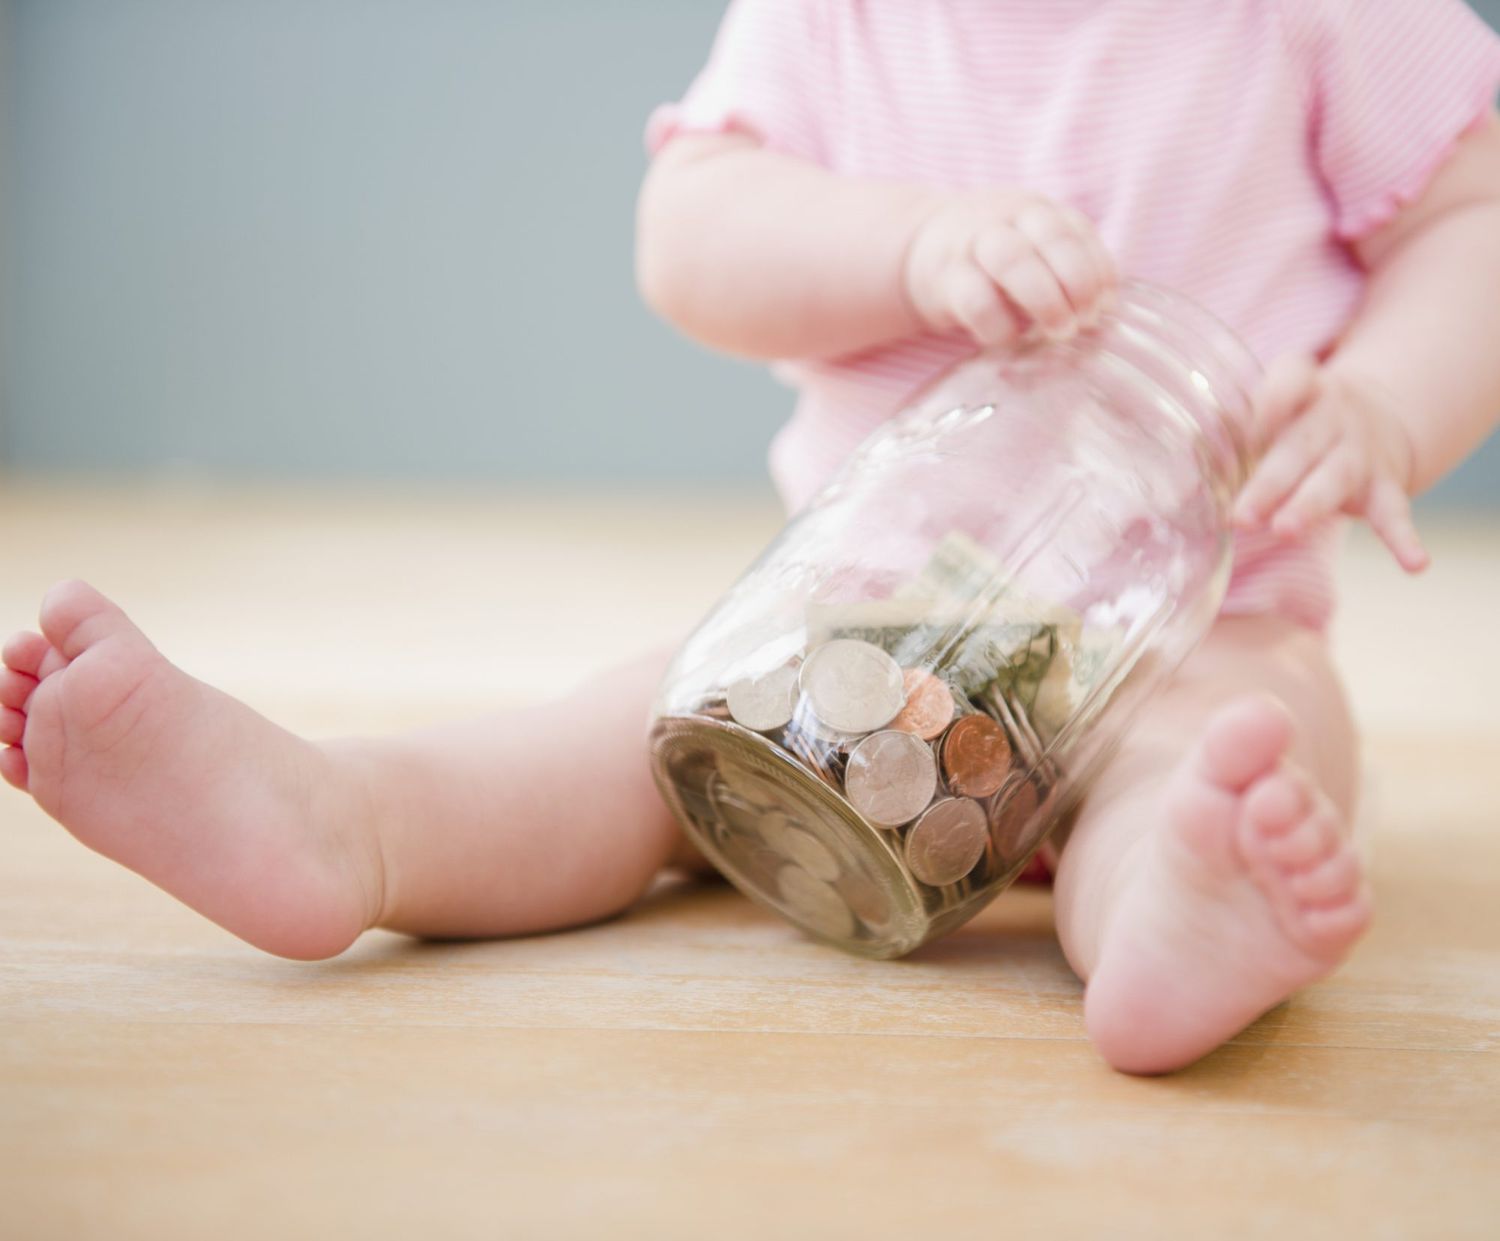 An image of a baby holding a jar with money.